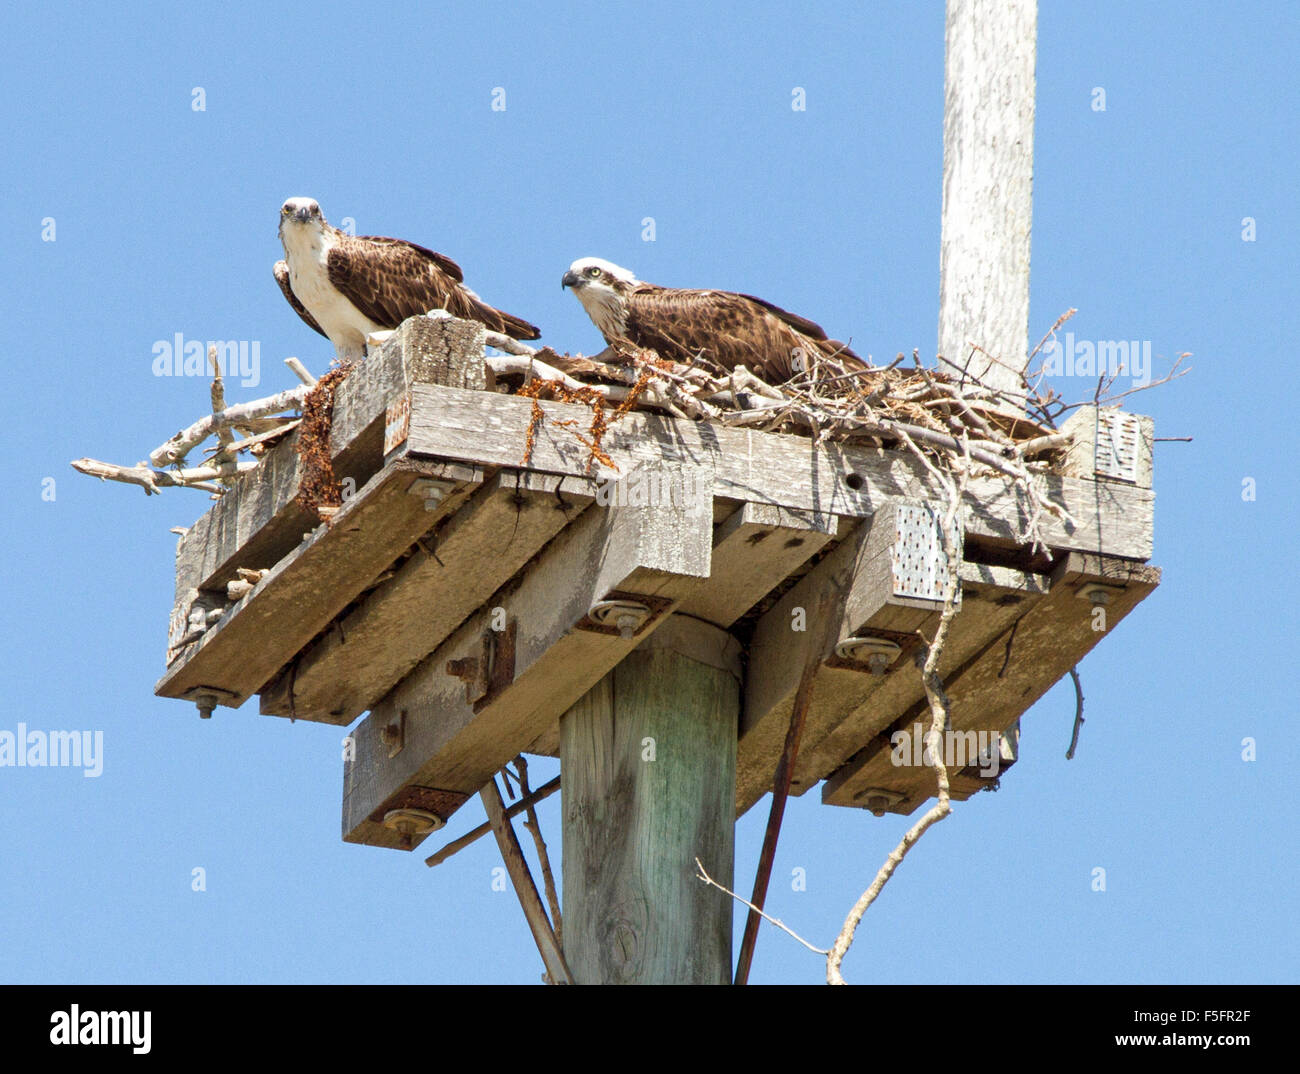 Pair of brahminy kites, red-backed sea eagles, on nest of timber & sticks on top of power pole against blue sky in Australia Stock Photo